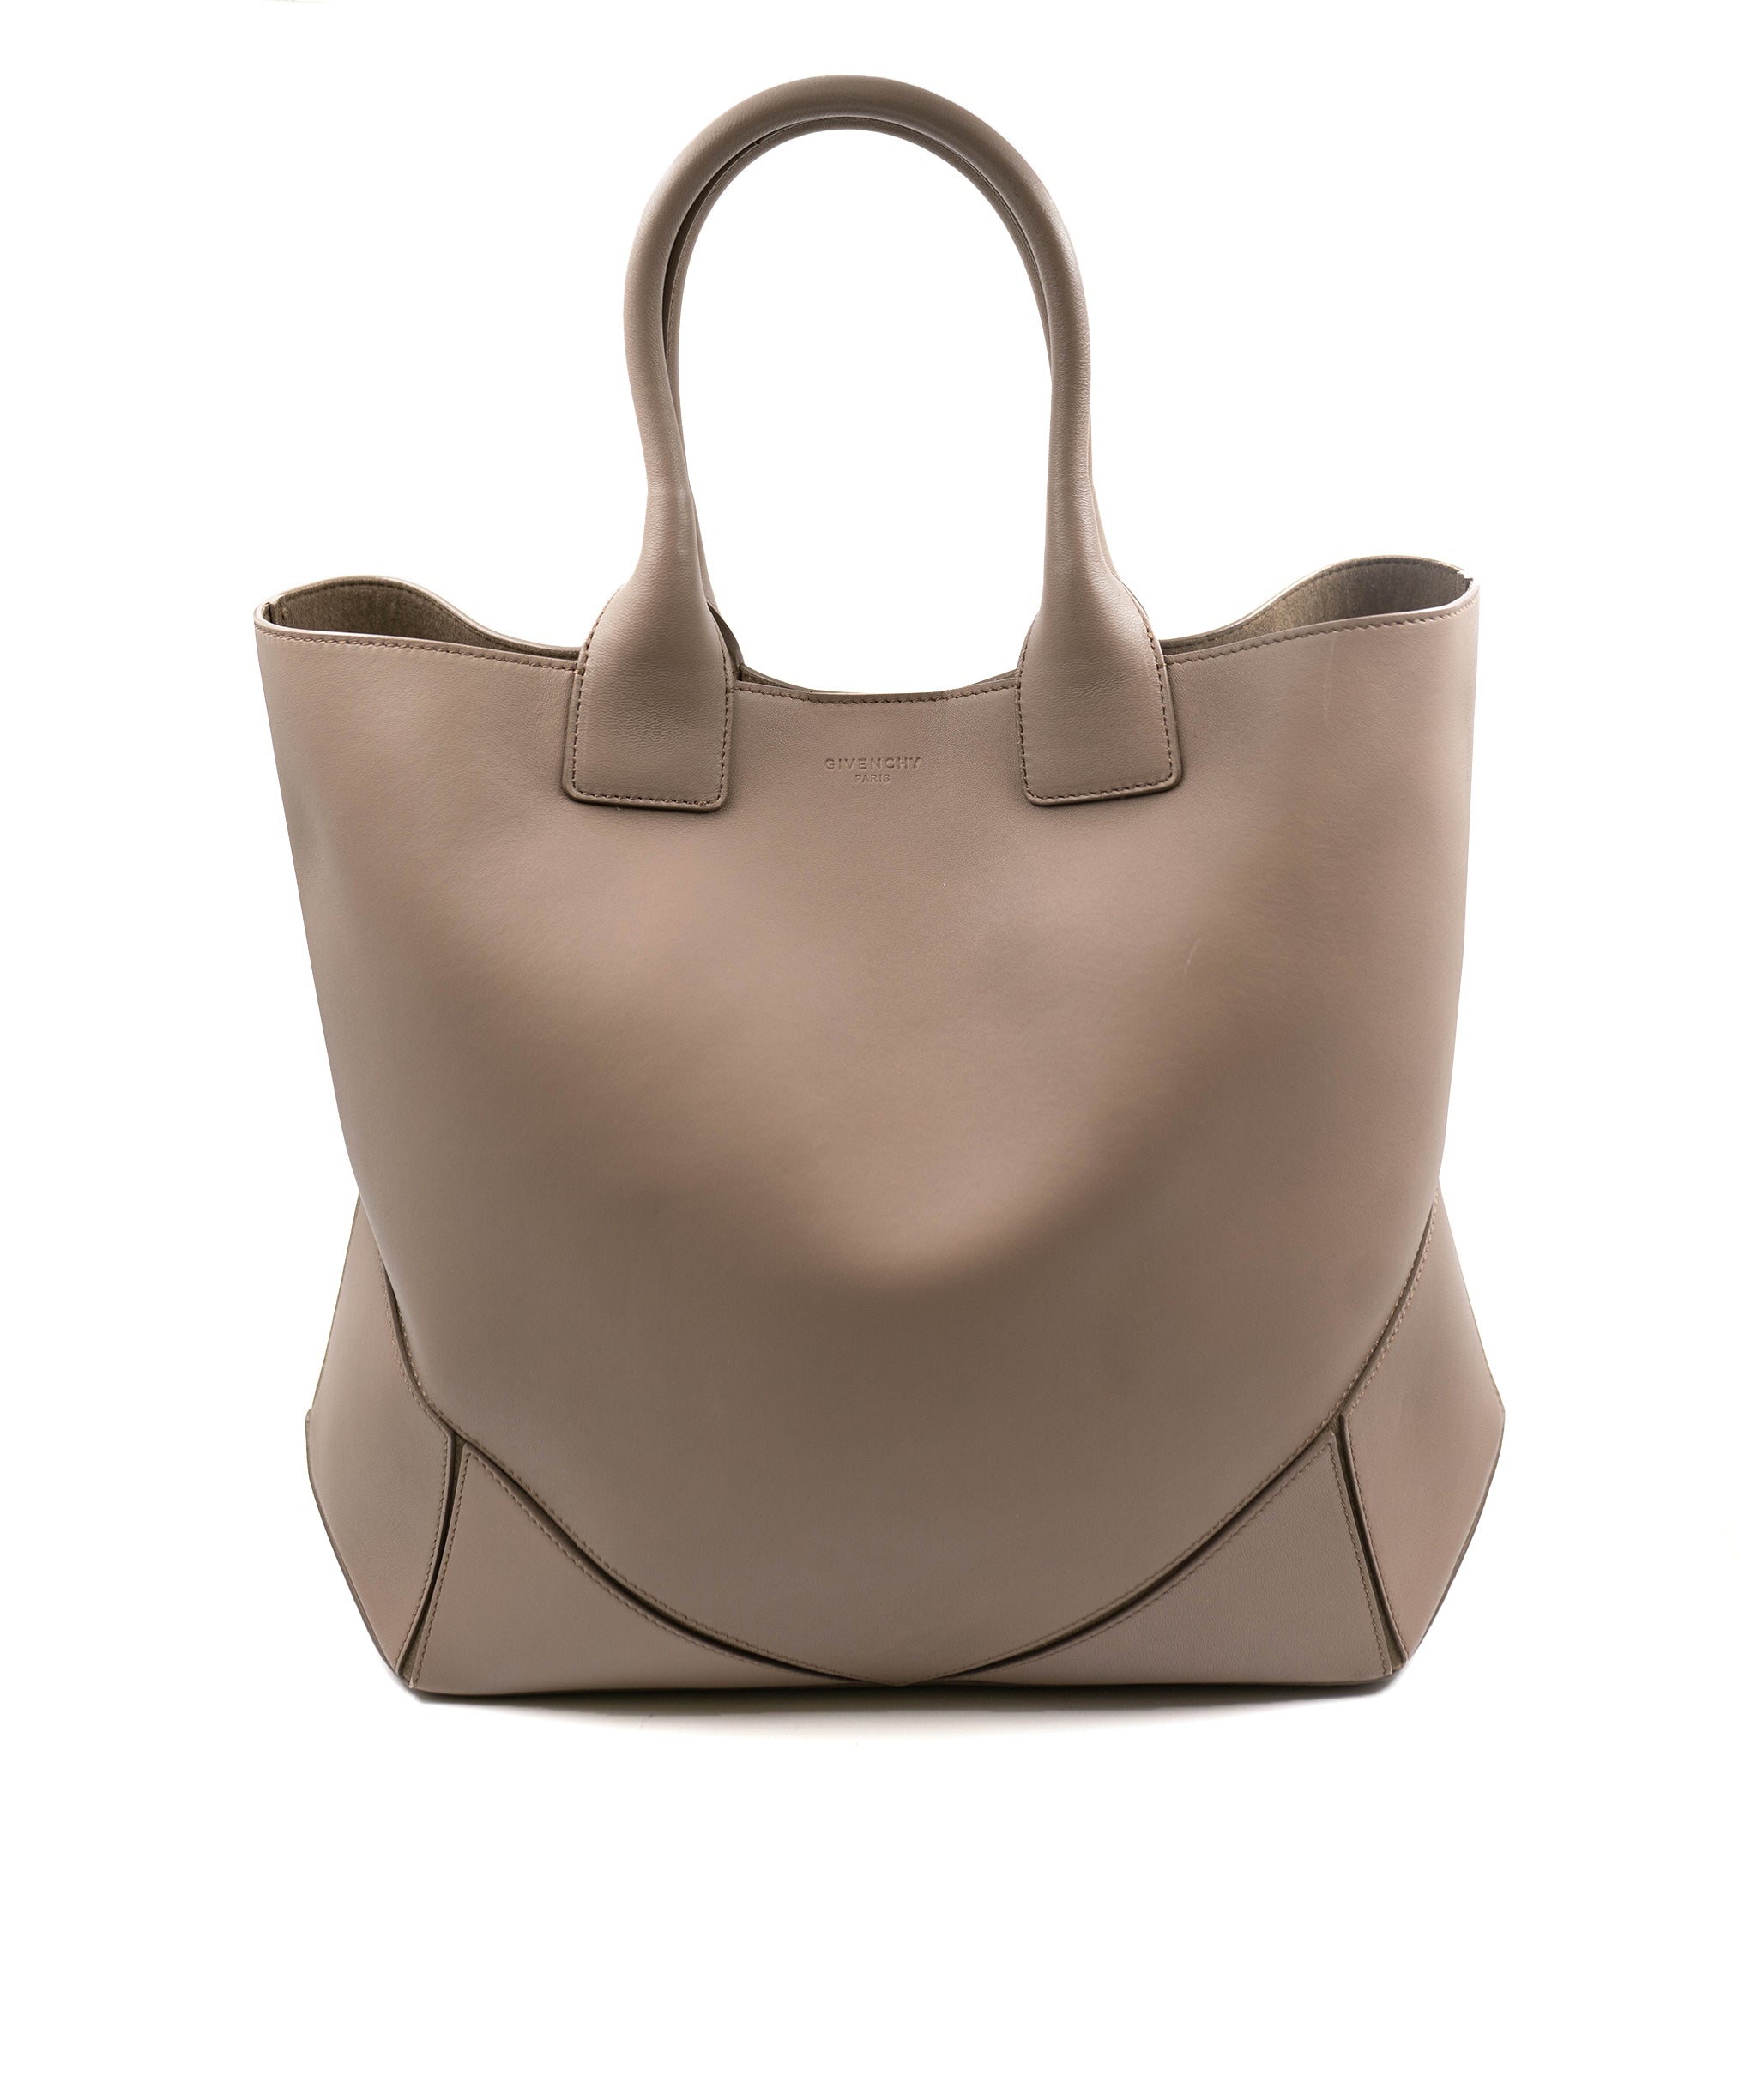 Givenchy Givenchy Beige Leather Tote Bag AGC1365